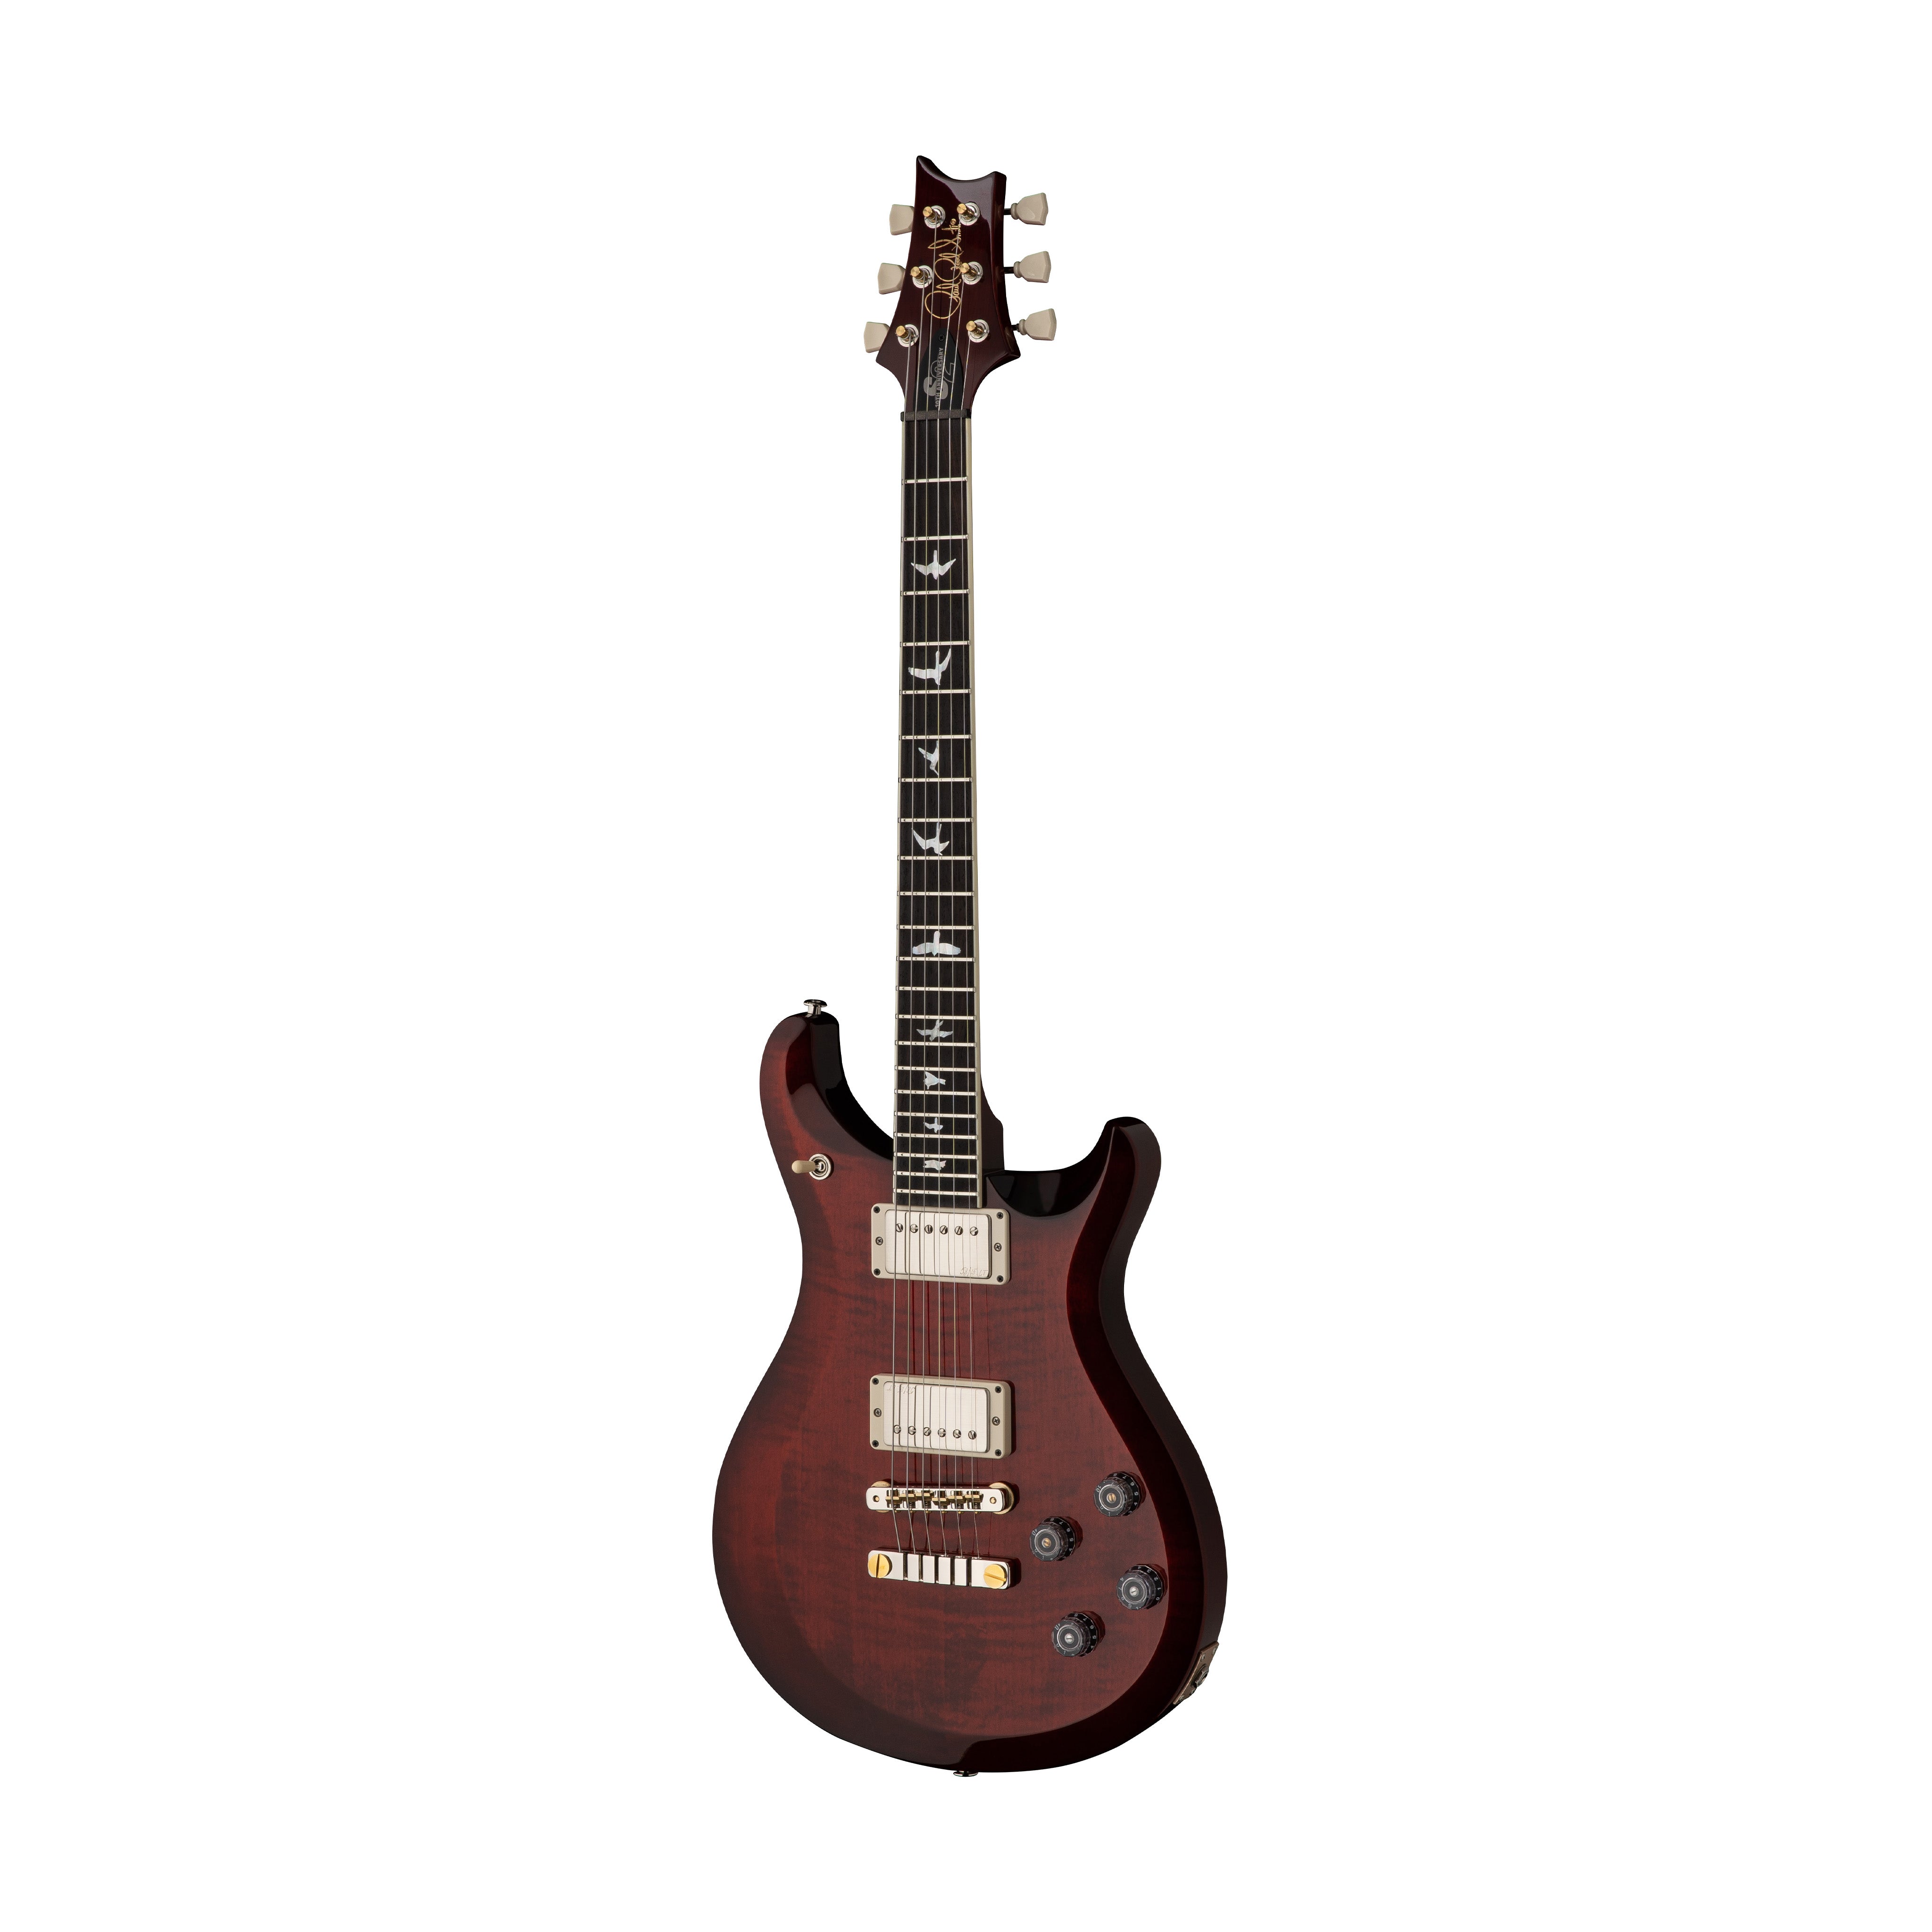 PRS S2 10th Anniversary McCarty 594 Limited Edition Electric Guitar, Fire Red Burst